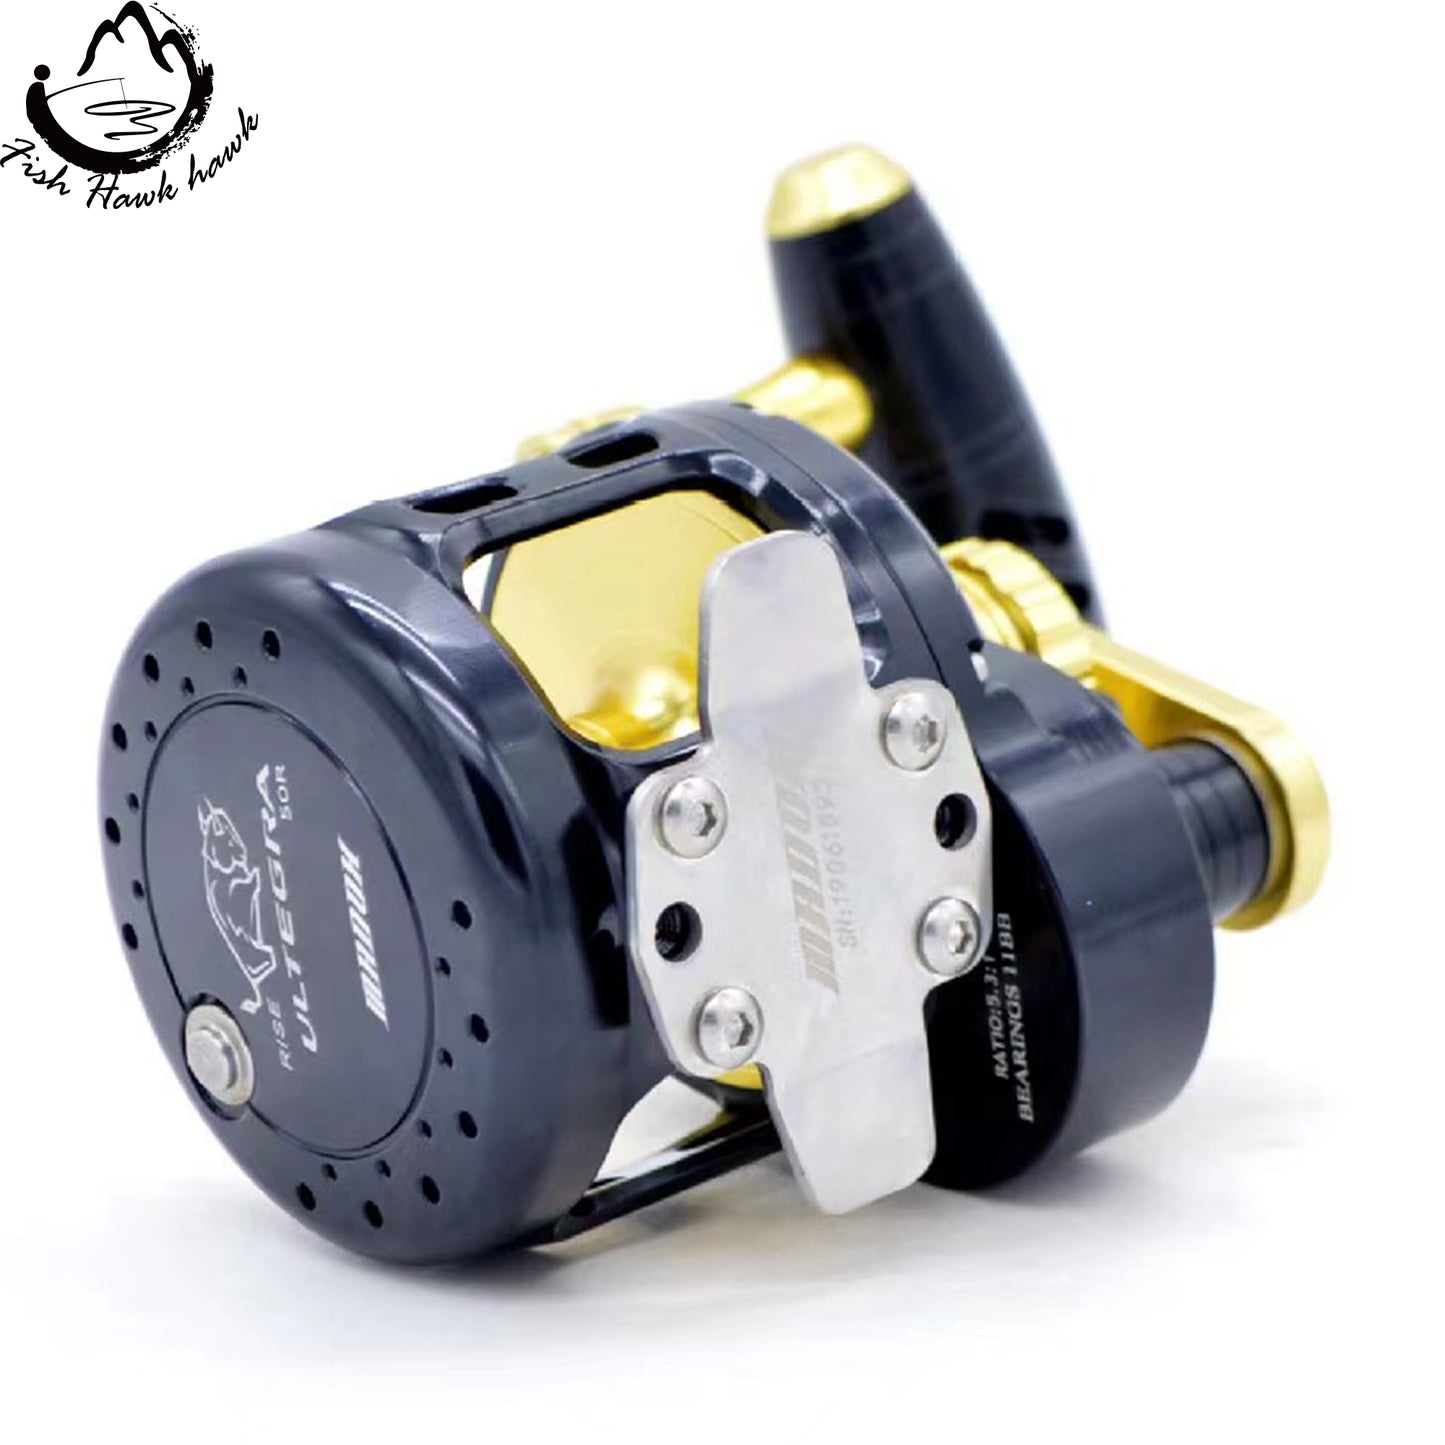 “Golden Bull” Slow Pitch Jigging Reel (left and right hand)